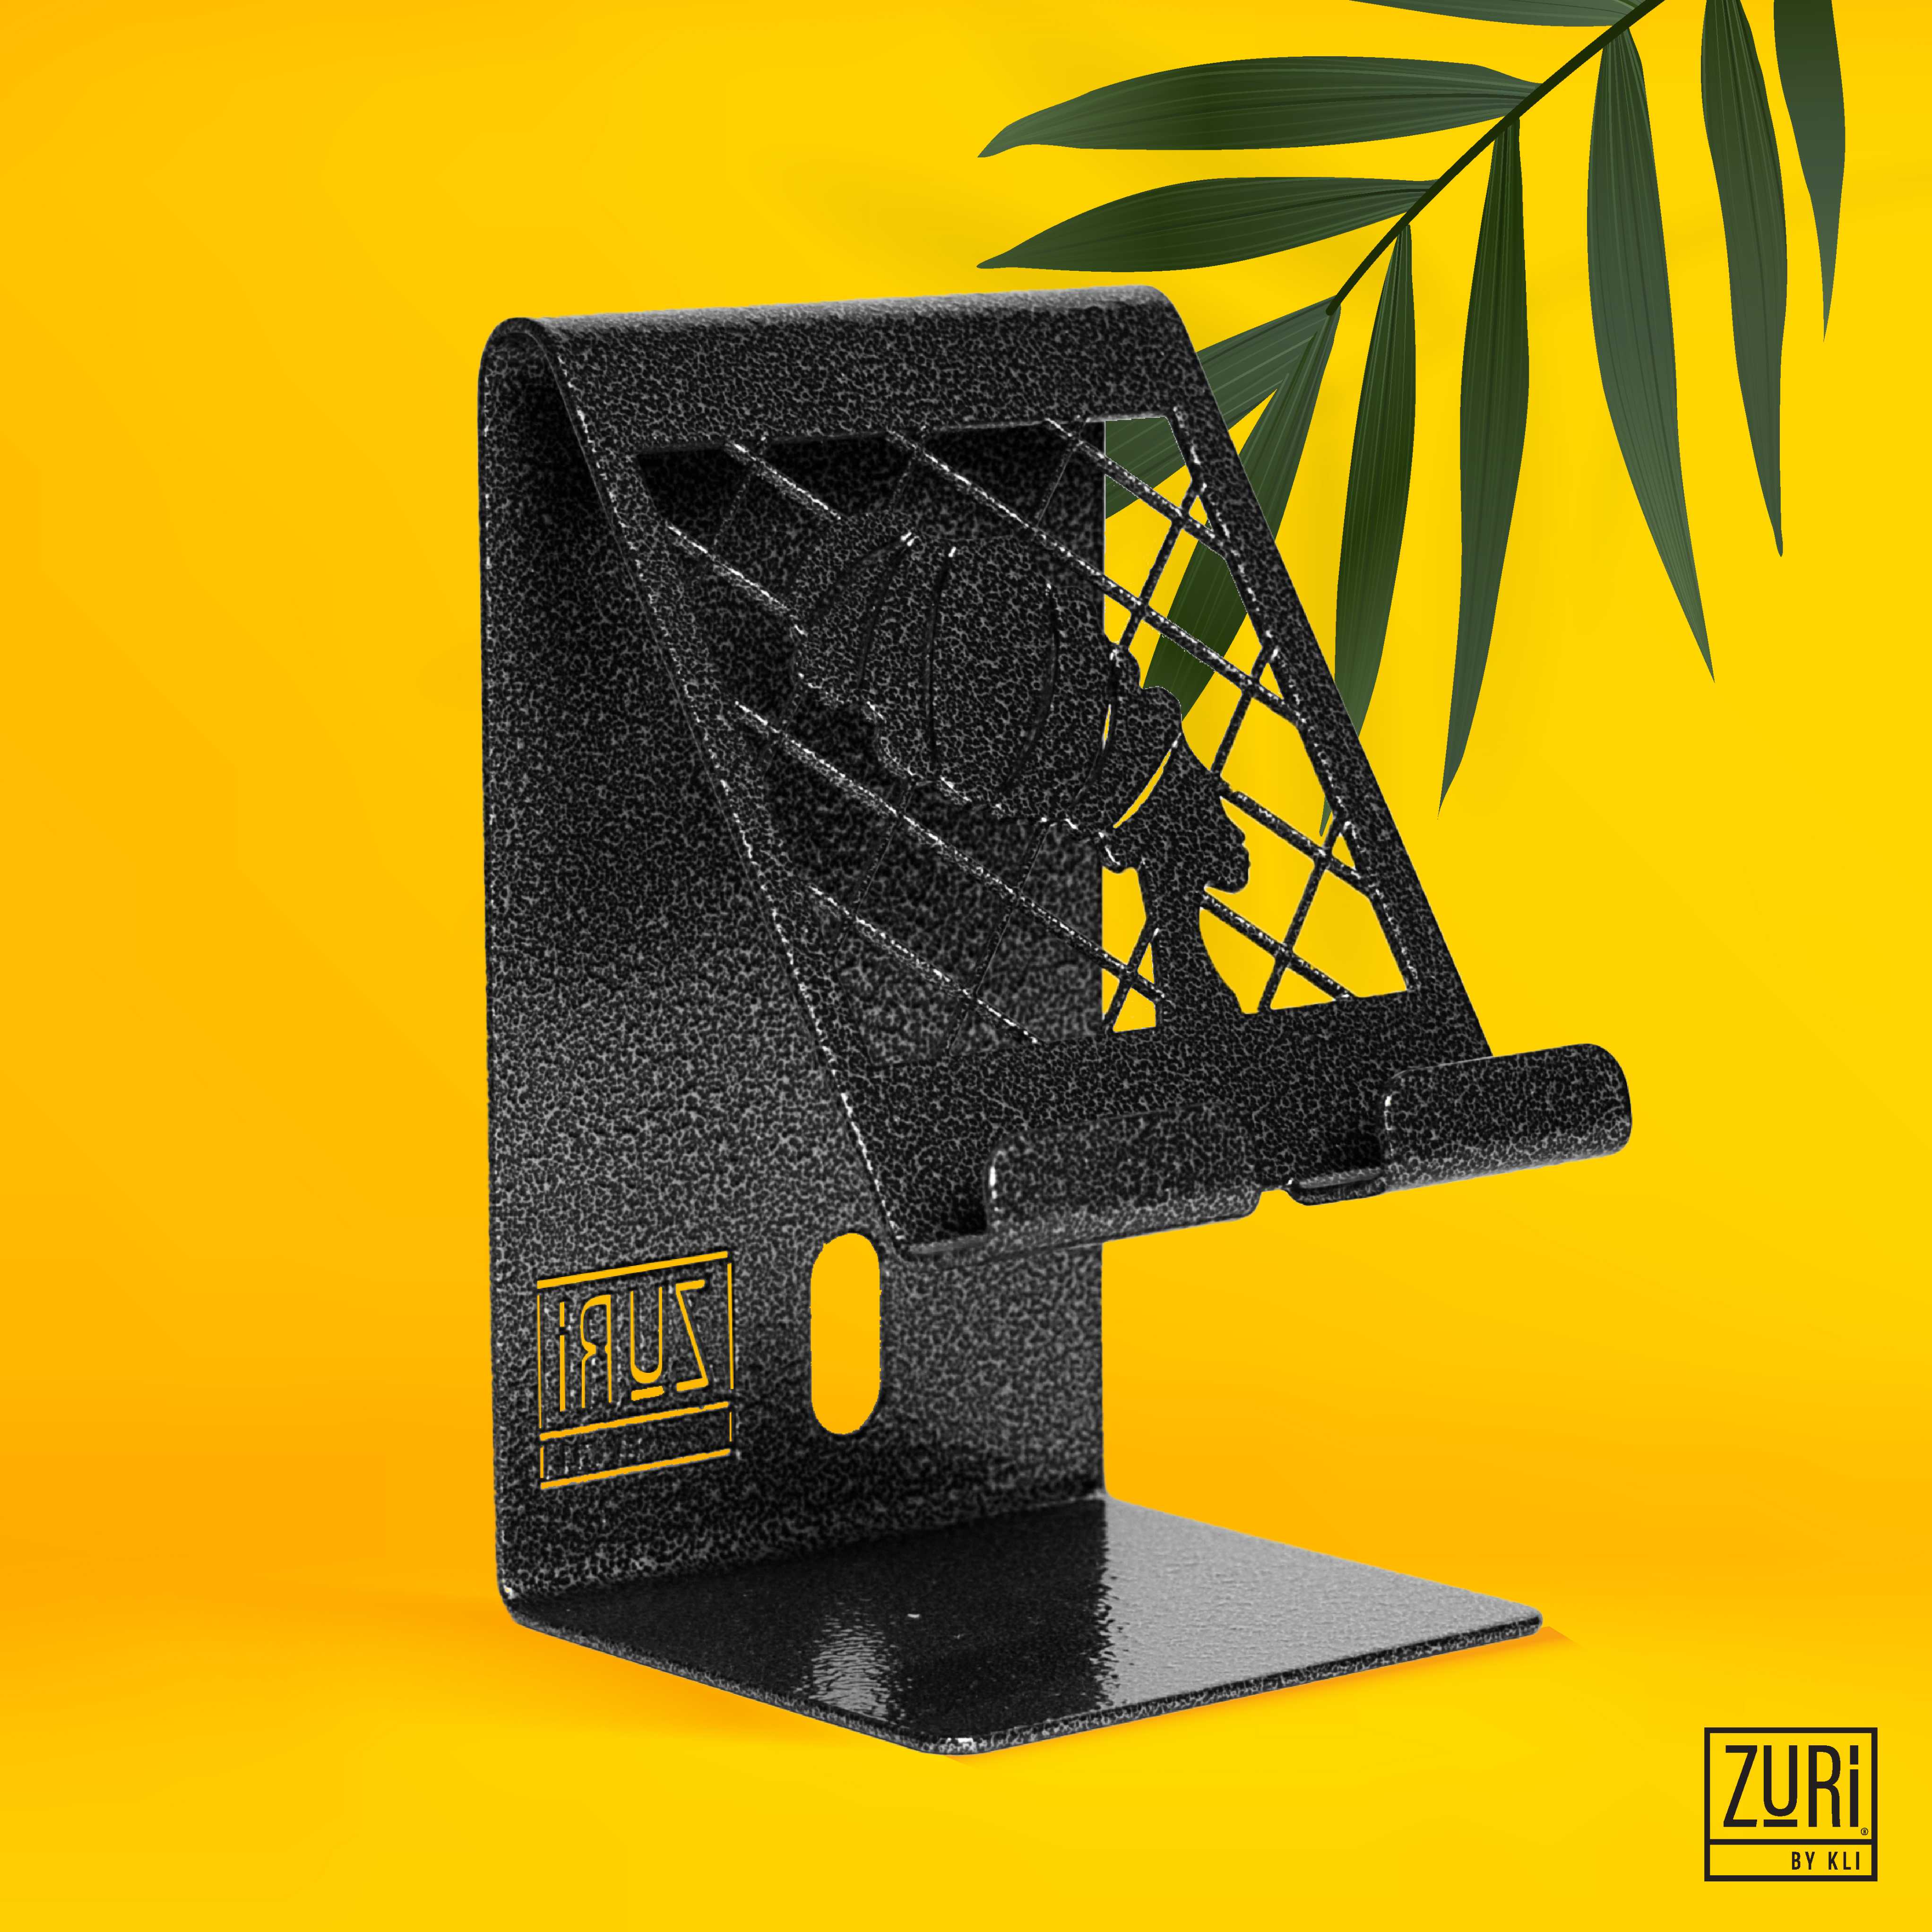 <p>Zuri Desk Mobile Phone Holder (Steel) </p>

<p>This  executive functional mobile phone holder is made of CRCA steel and electrostatically powder coated in either antique copper (Lady Design), antique silver (Geometric Design), arctic white (Geometric Design) or tangerine (Lady Design).</p>

<p>The front features two distinct design patterns and has a rear slot for running a USB charge cable, front slots for speakers and charging point for phones.</p>

<ul>
	<li>Dimensions ( L x W x H) : 8cm x 8cm x 13.5 cm</li>
	<li>Lady Design -Textured  Antique Silver</li>
</ul>
